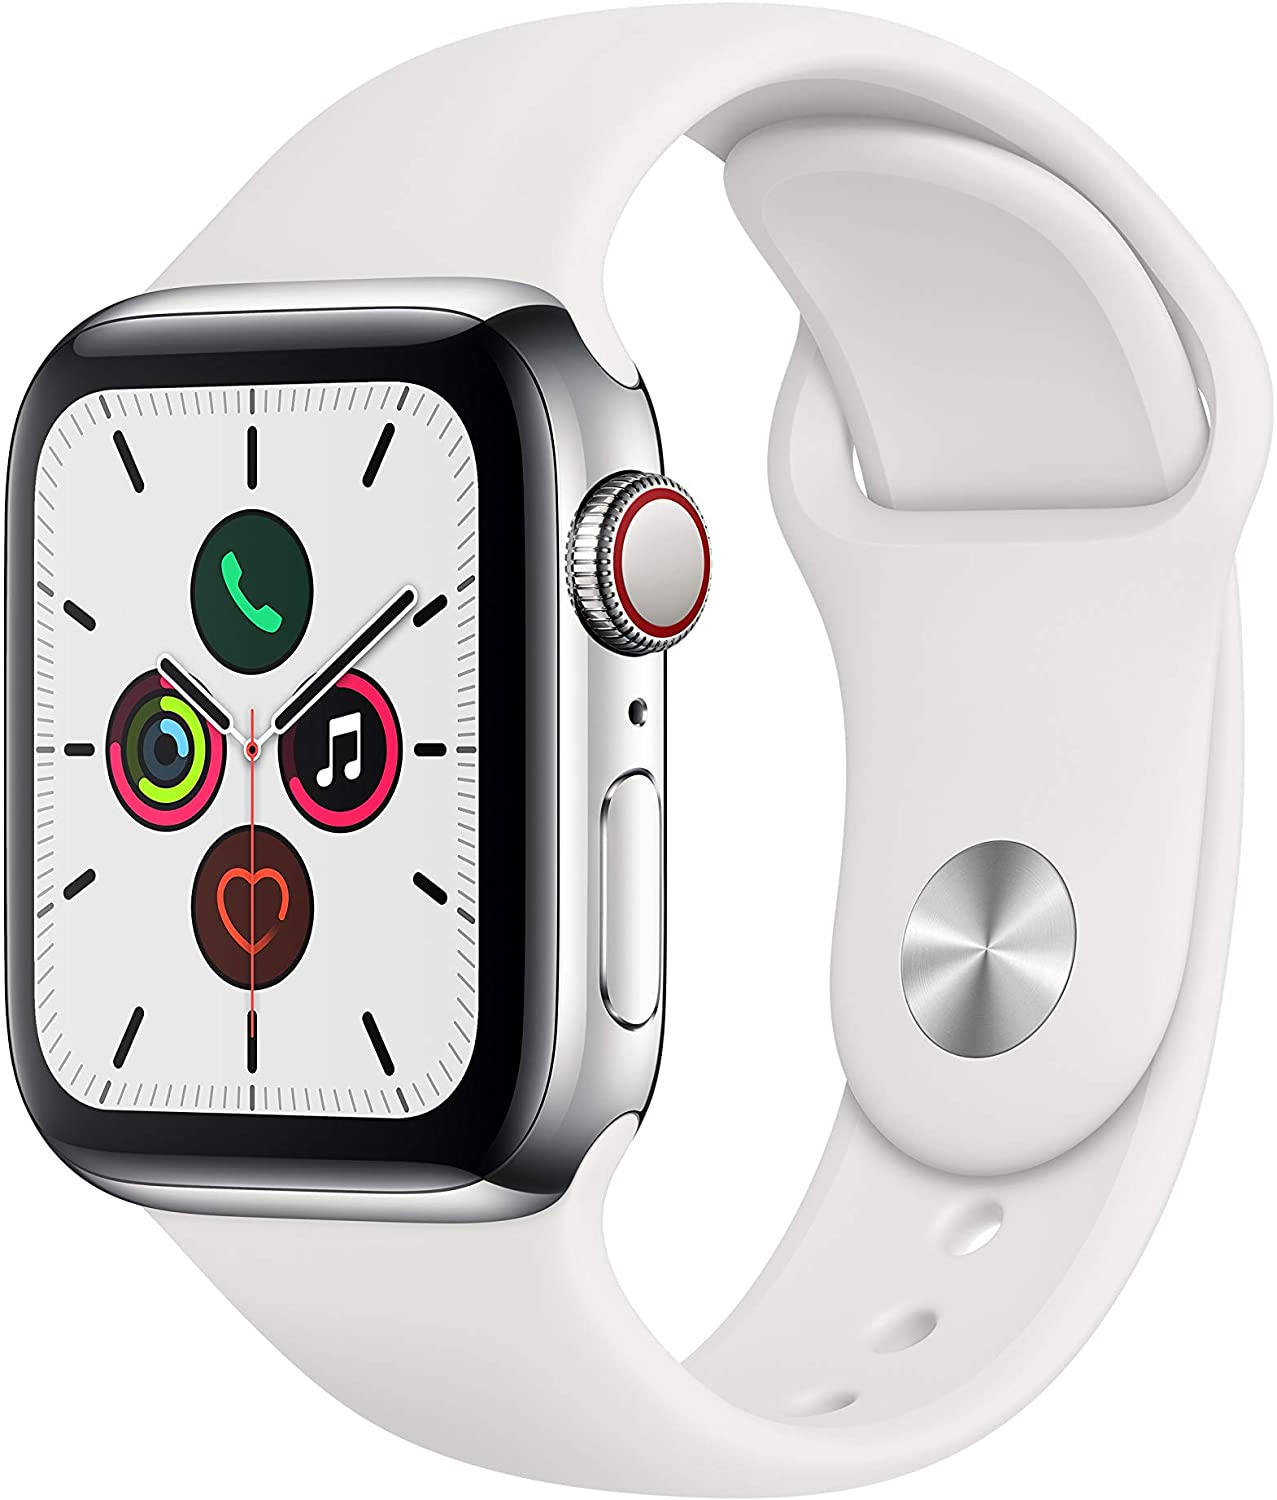 Apple Watch Series 5 (2019) 40mm GPS + Cellular - Stainless Steel Case &amp; White Sport Band (Refurbished)